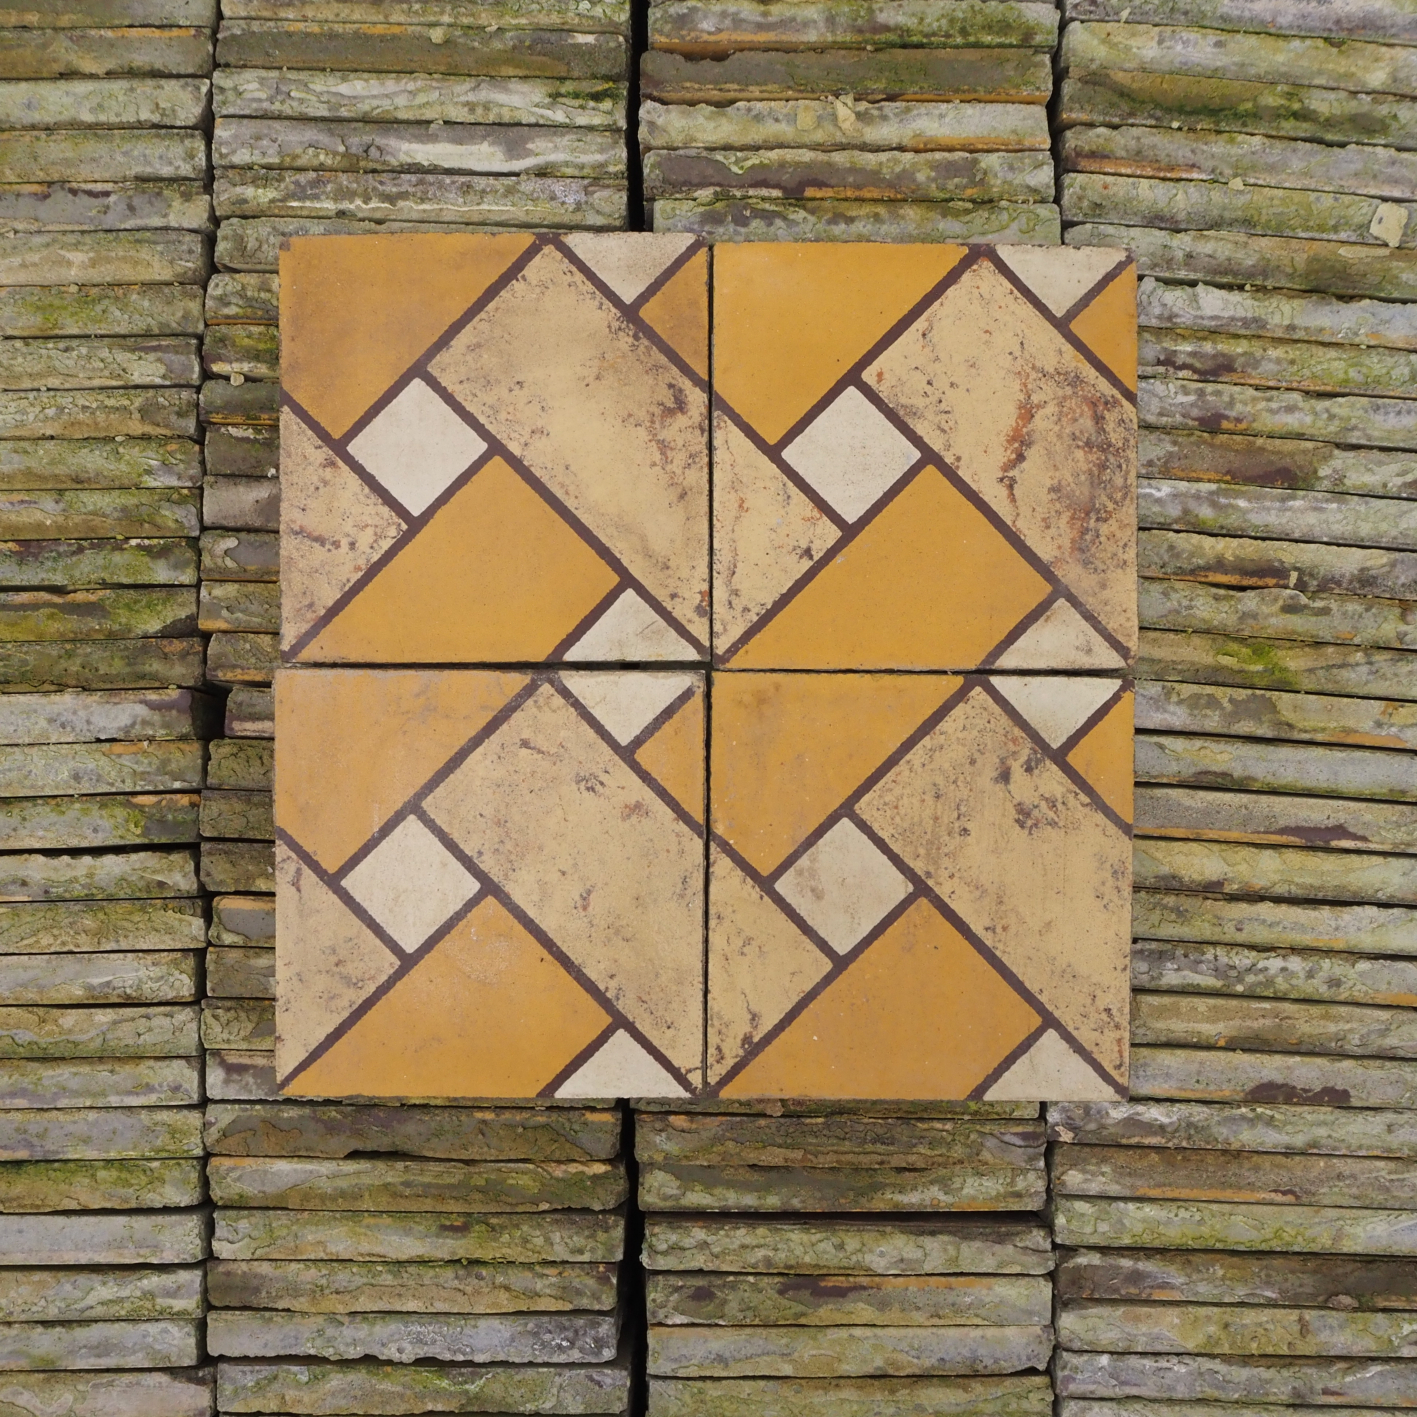 Cement tiles 'Crippled Symmetry' by Impermo (17 x 17 cm)